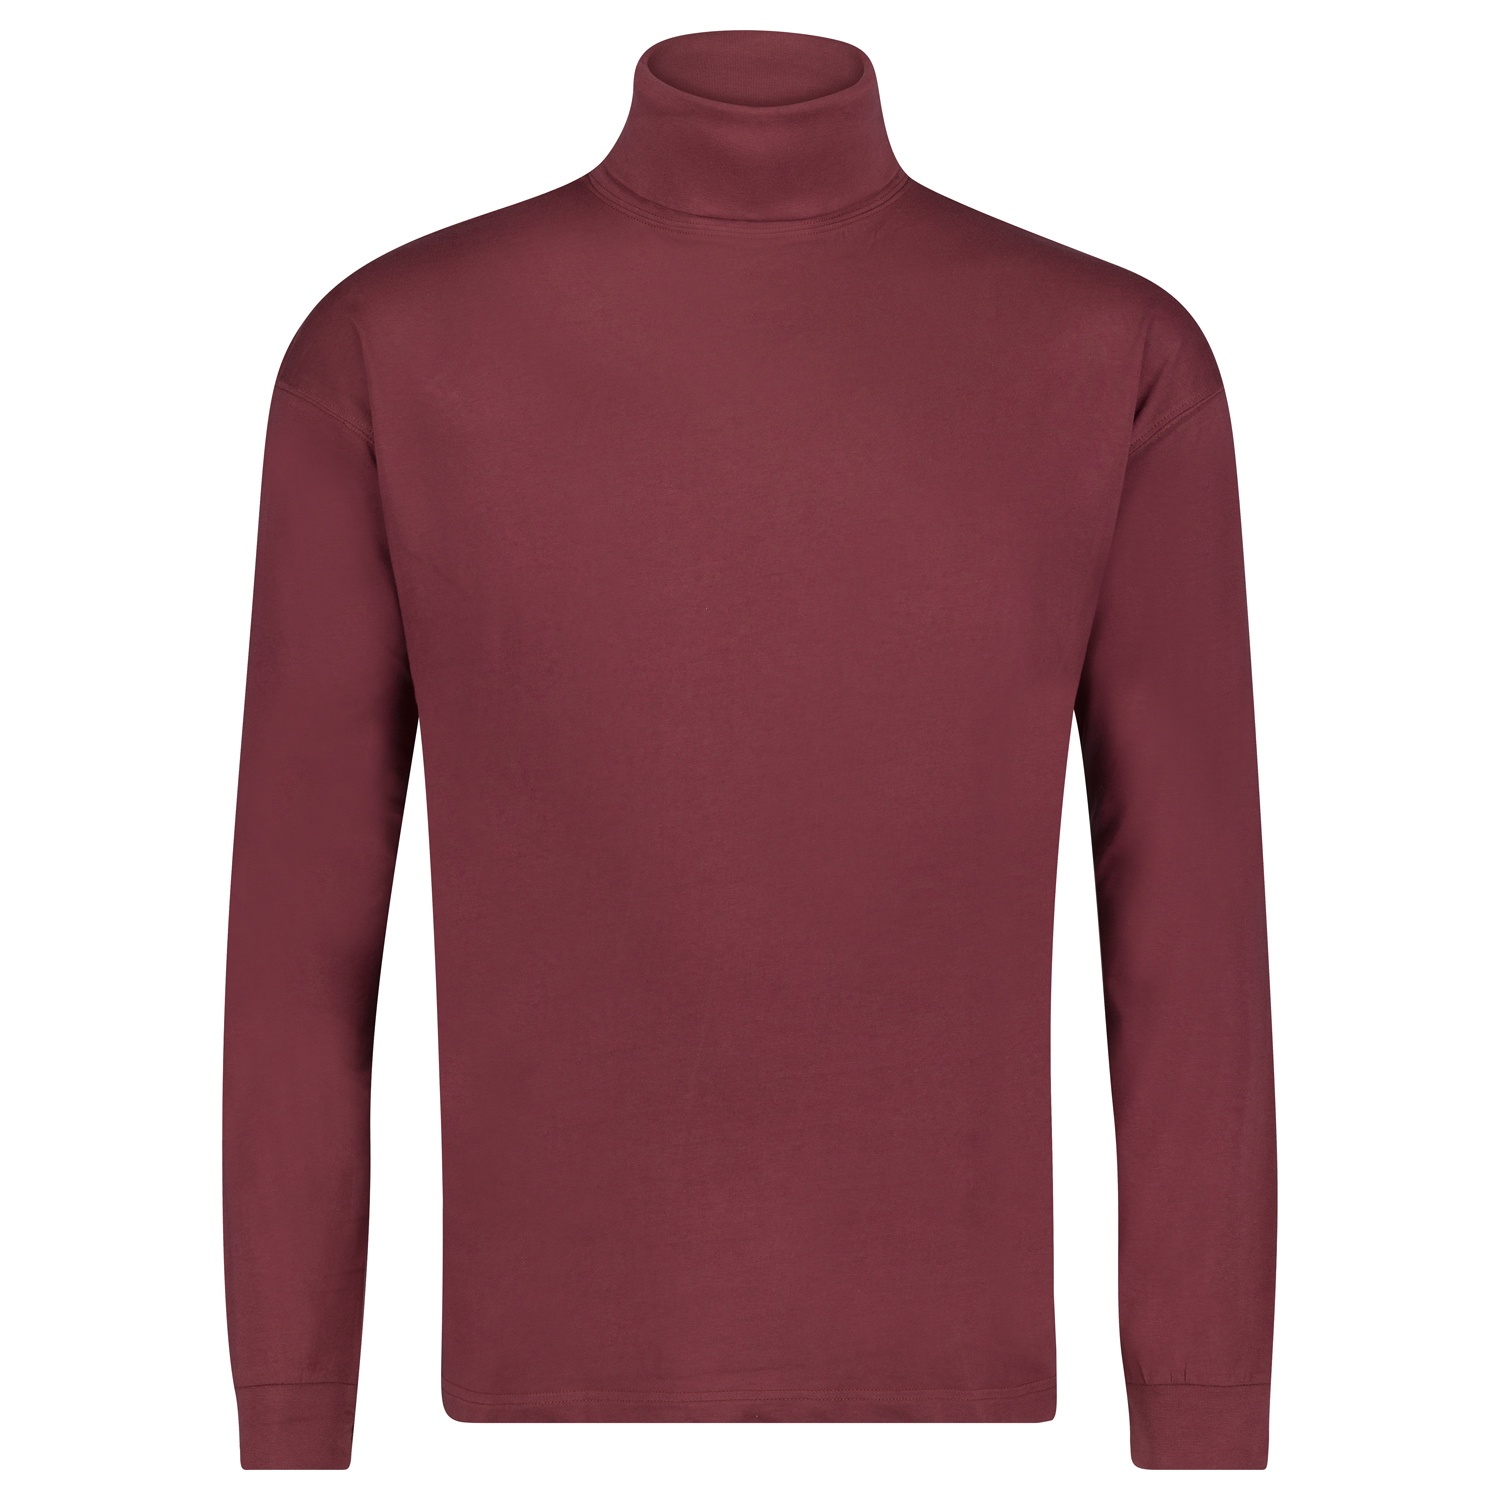 Longsleeve for men with turtle neck COMFORT FIT in dark red by ADAMO in size 2XL up to oversize 12XL